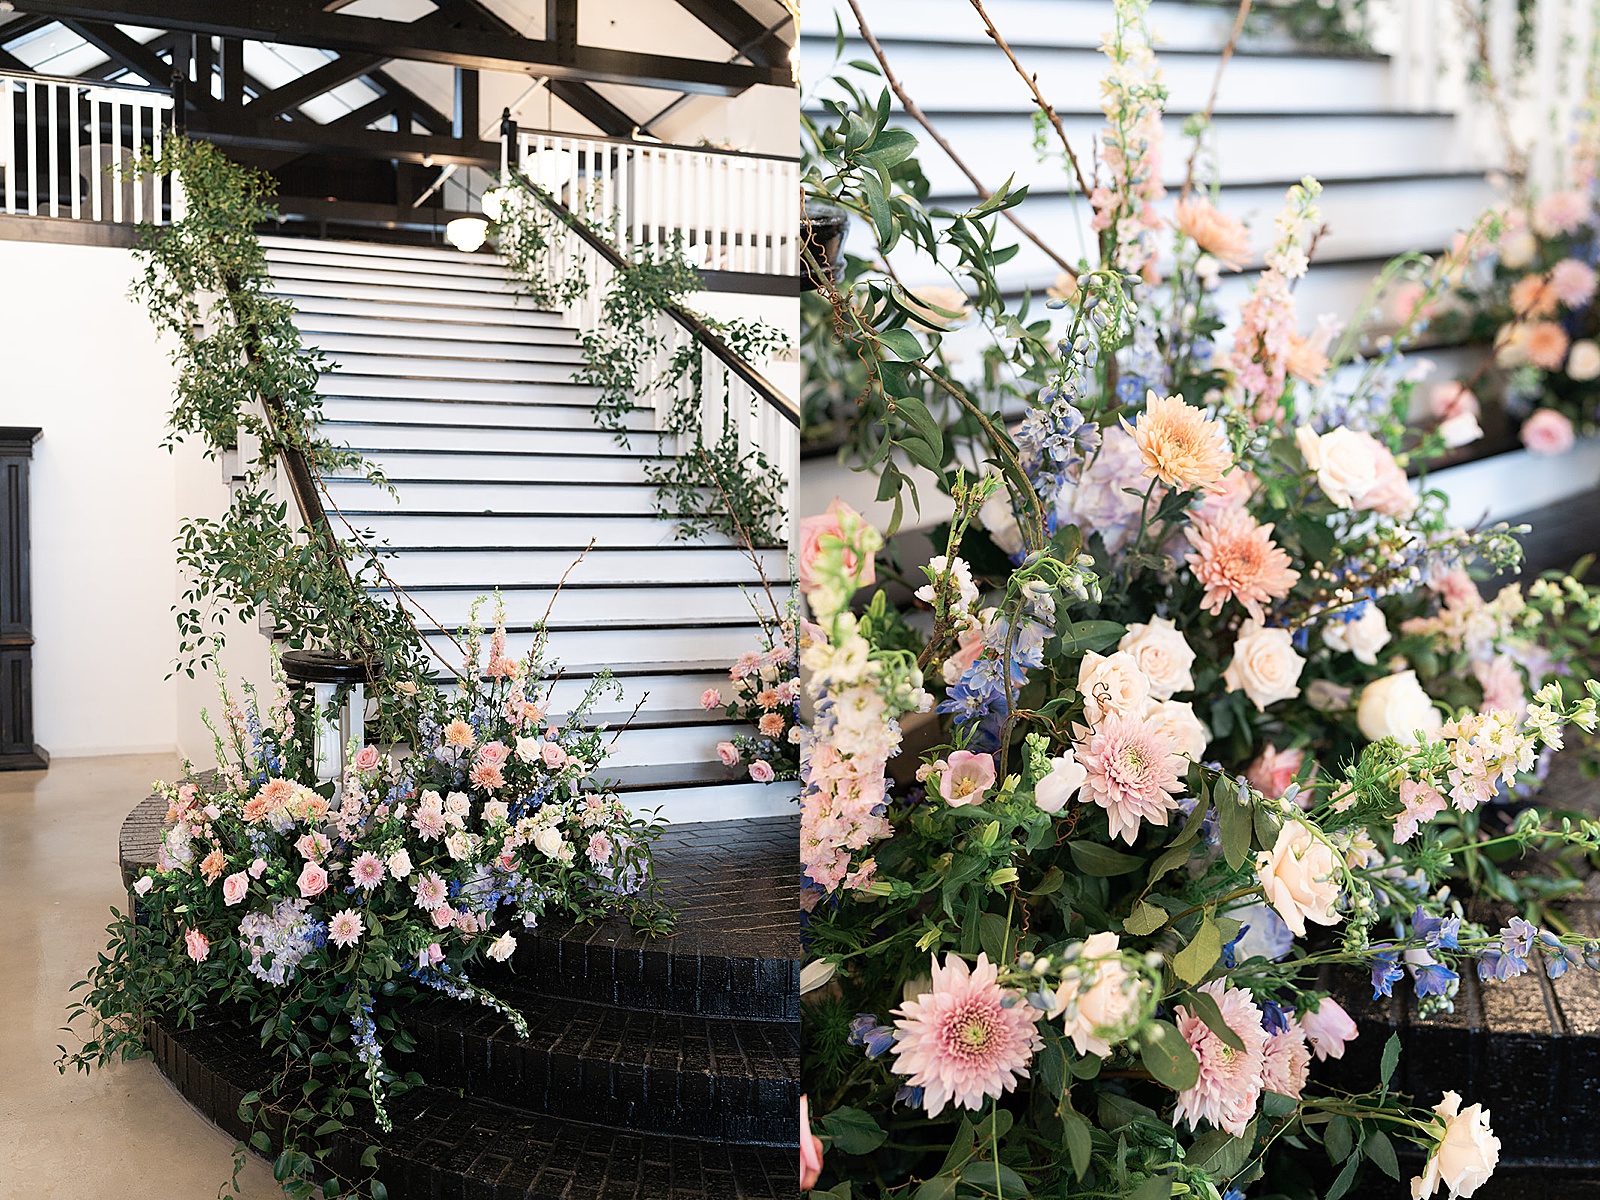 Stunning cool-toned floral installation on a staircase by Amanda Bee’s Floral Design